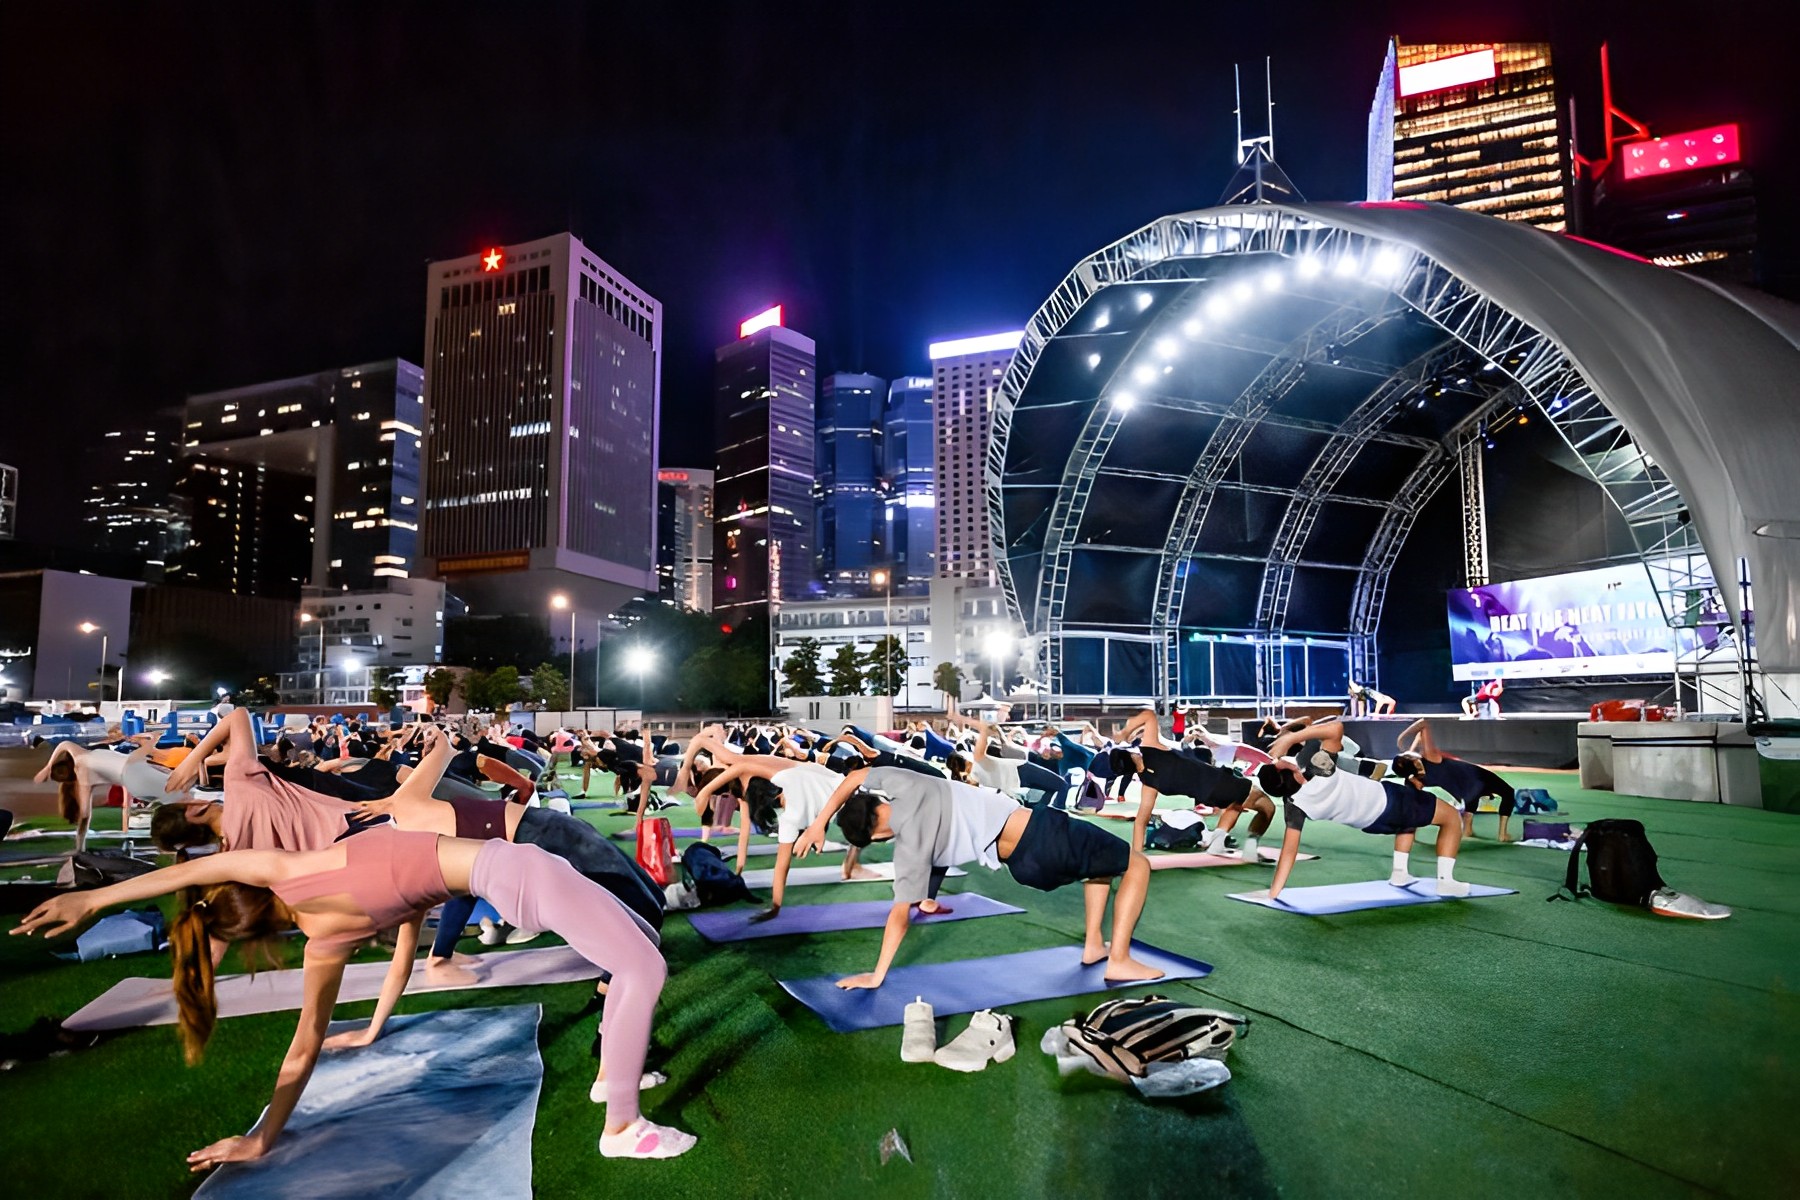 There will be nighttime yoga classes and demonstrations as part of the Fit & Well - Moonlight Yoga sessions.